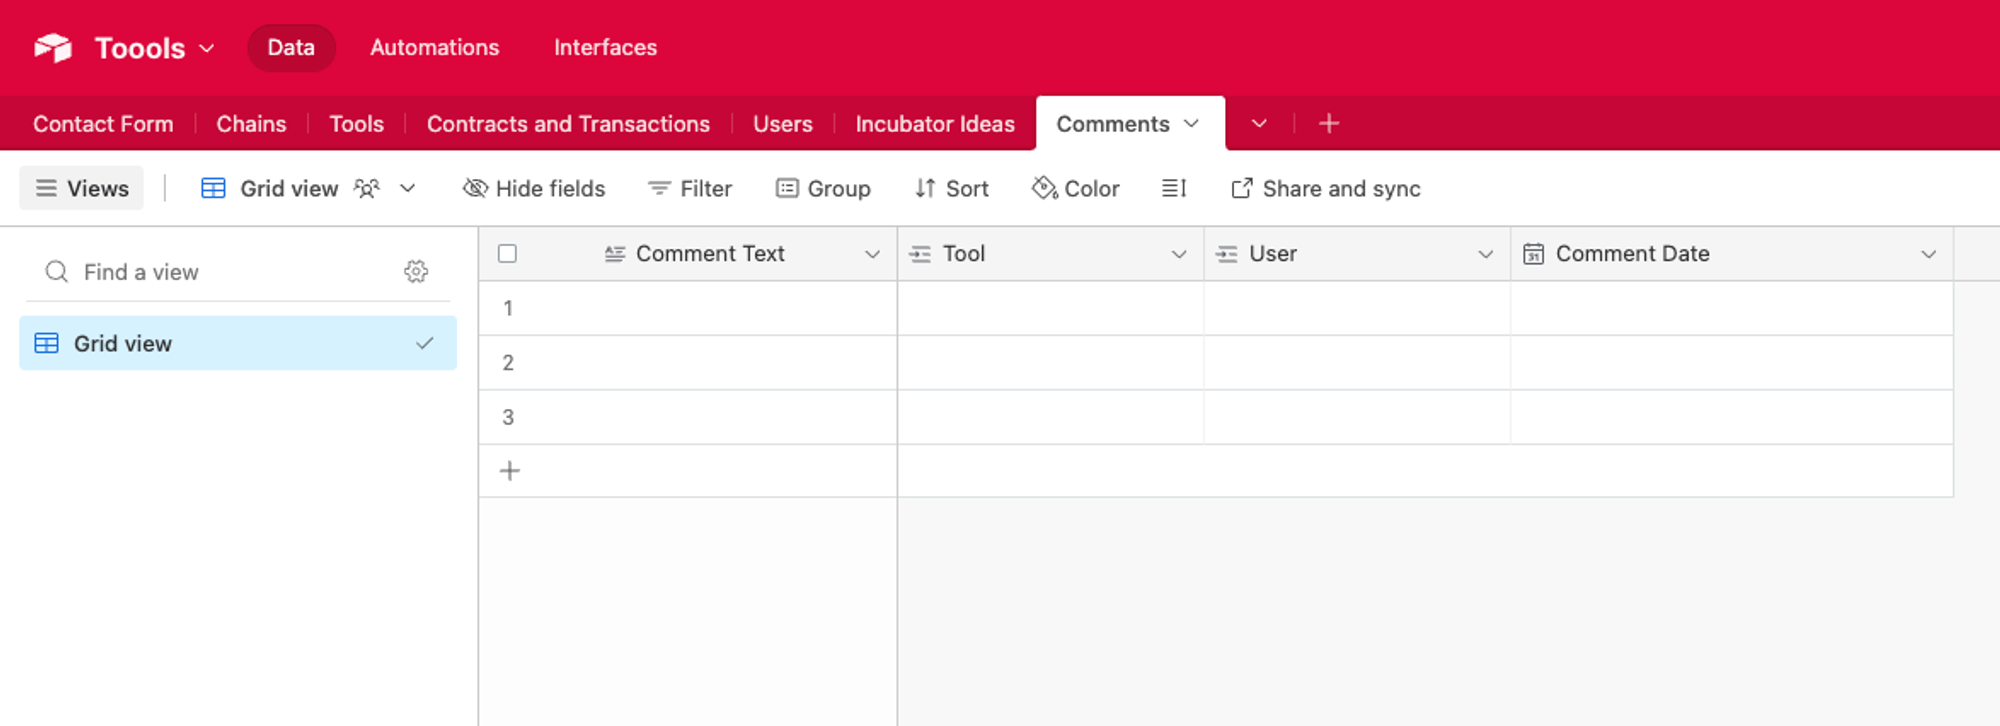 Example Airtable base for storing Comments